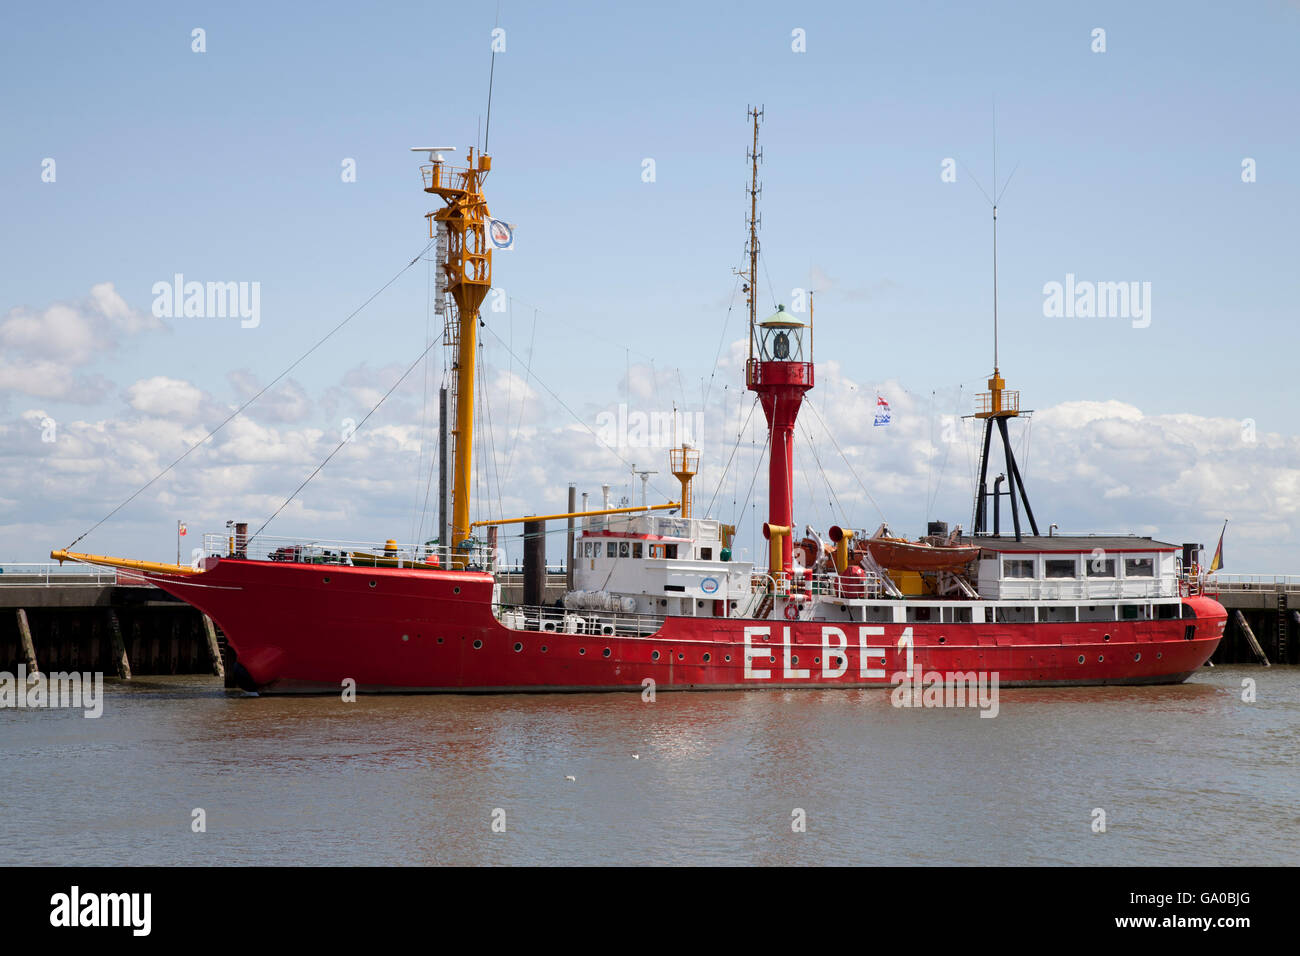 Lightship Black and White Stock Photos & Images - Alamy